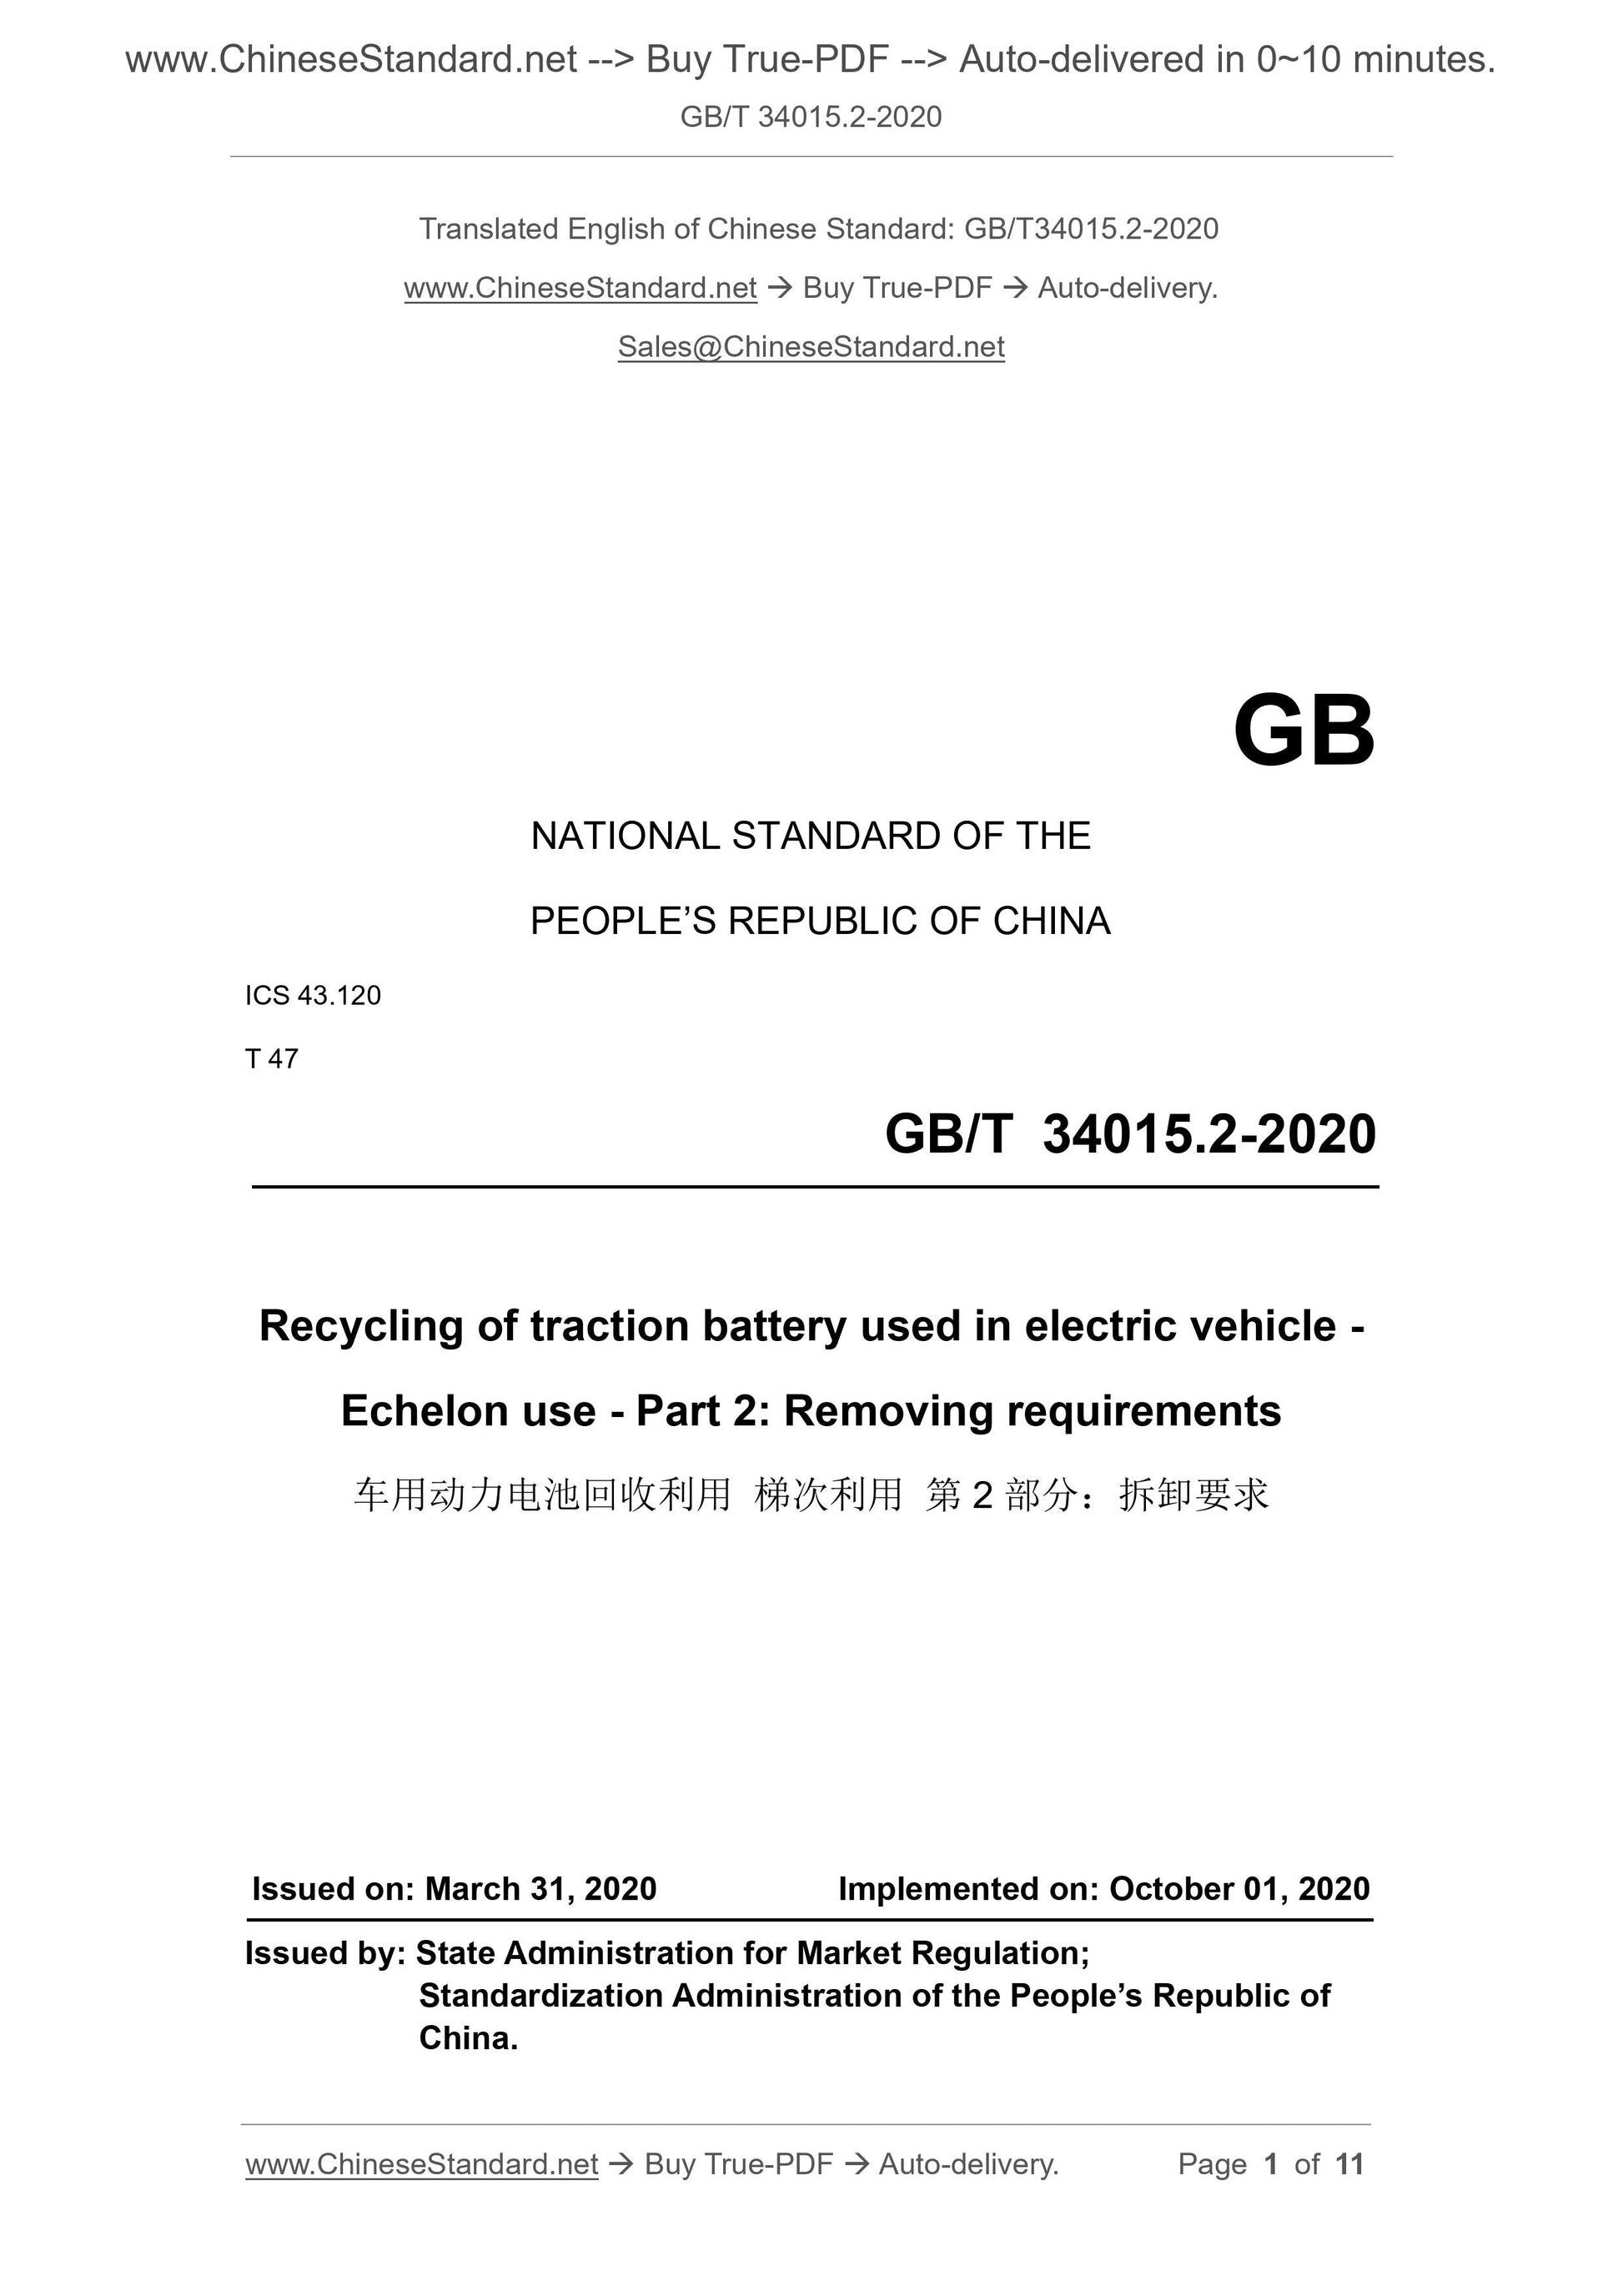 GB/T 34015.2-2020 Page 1